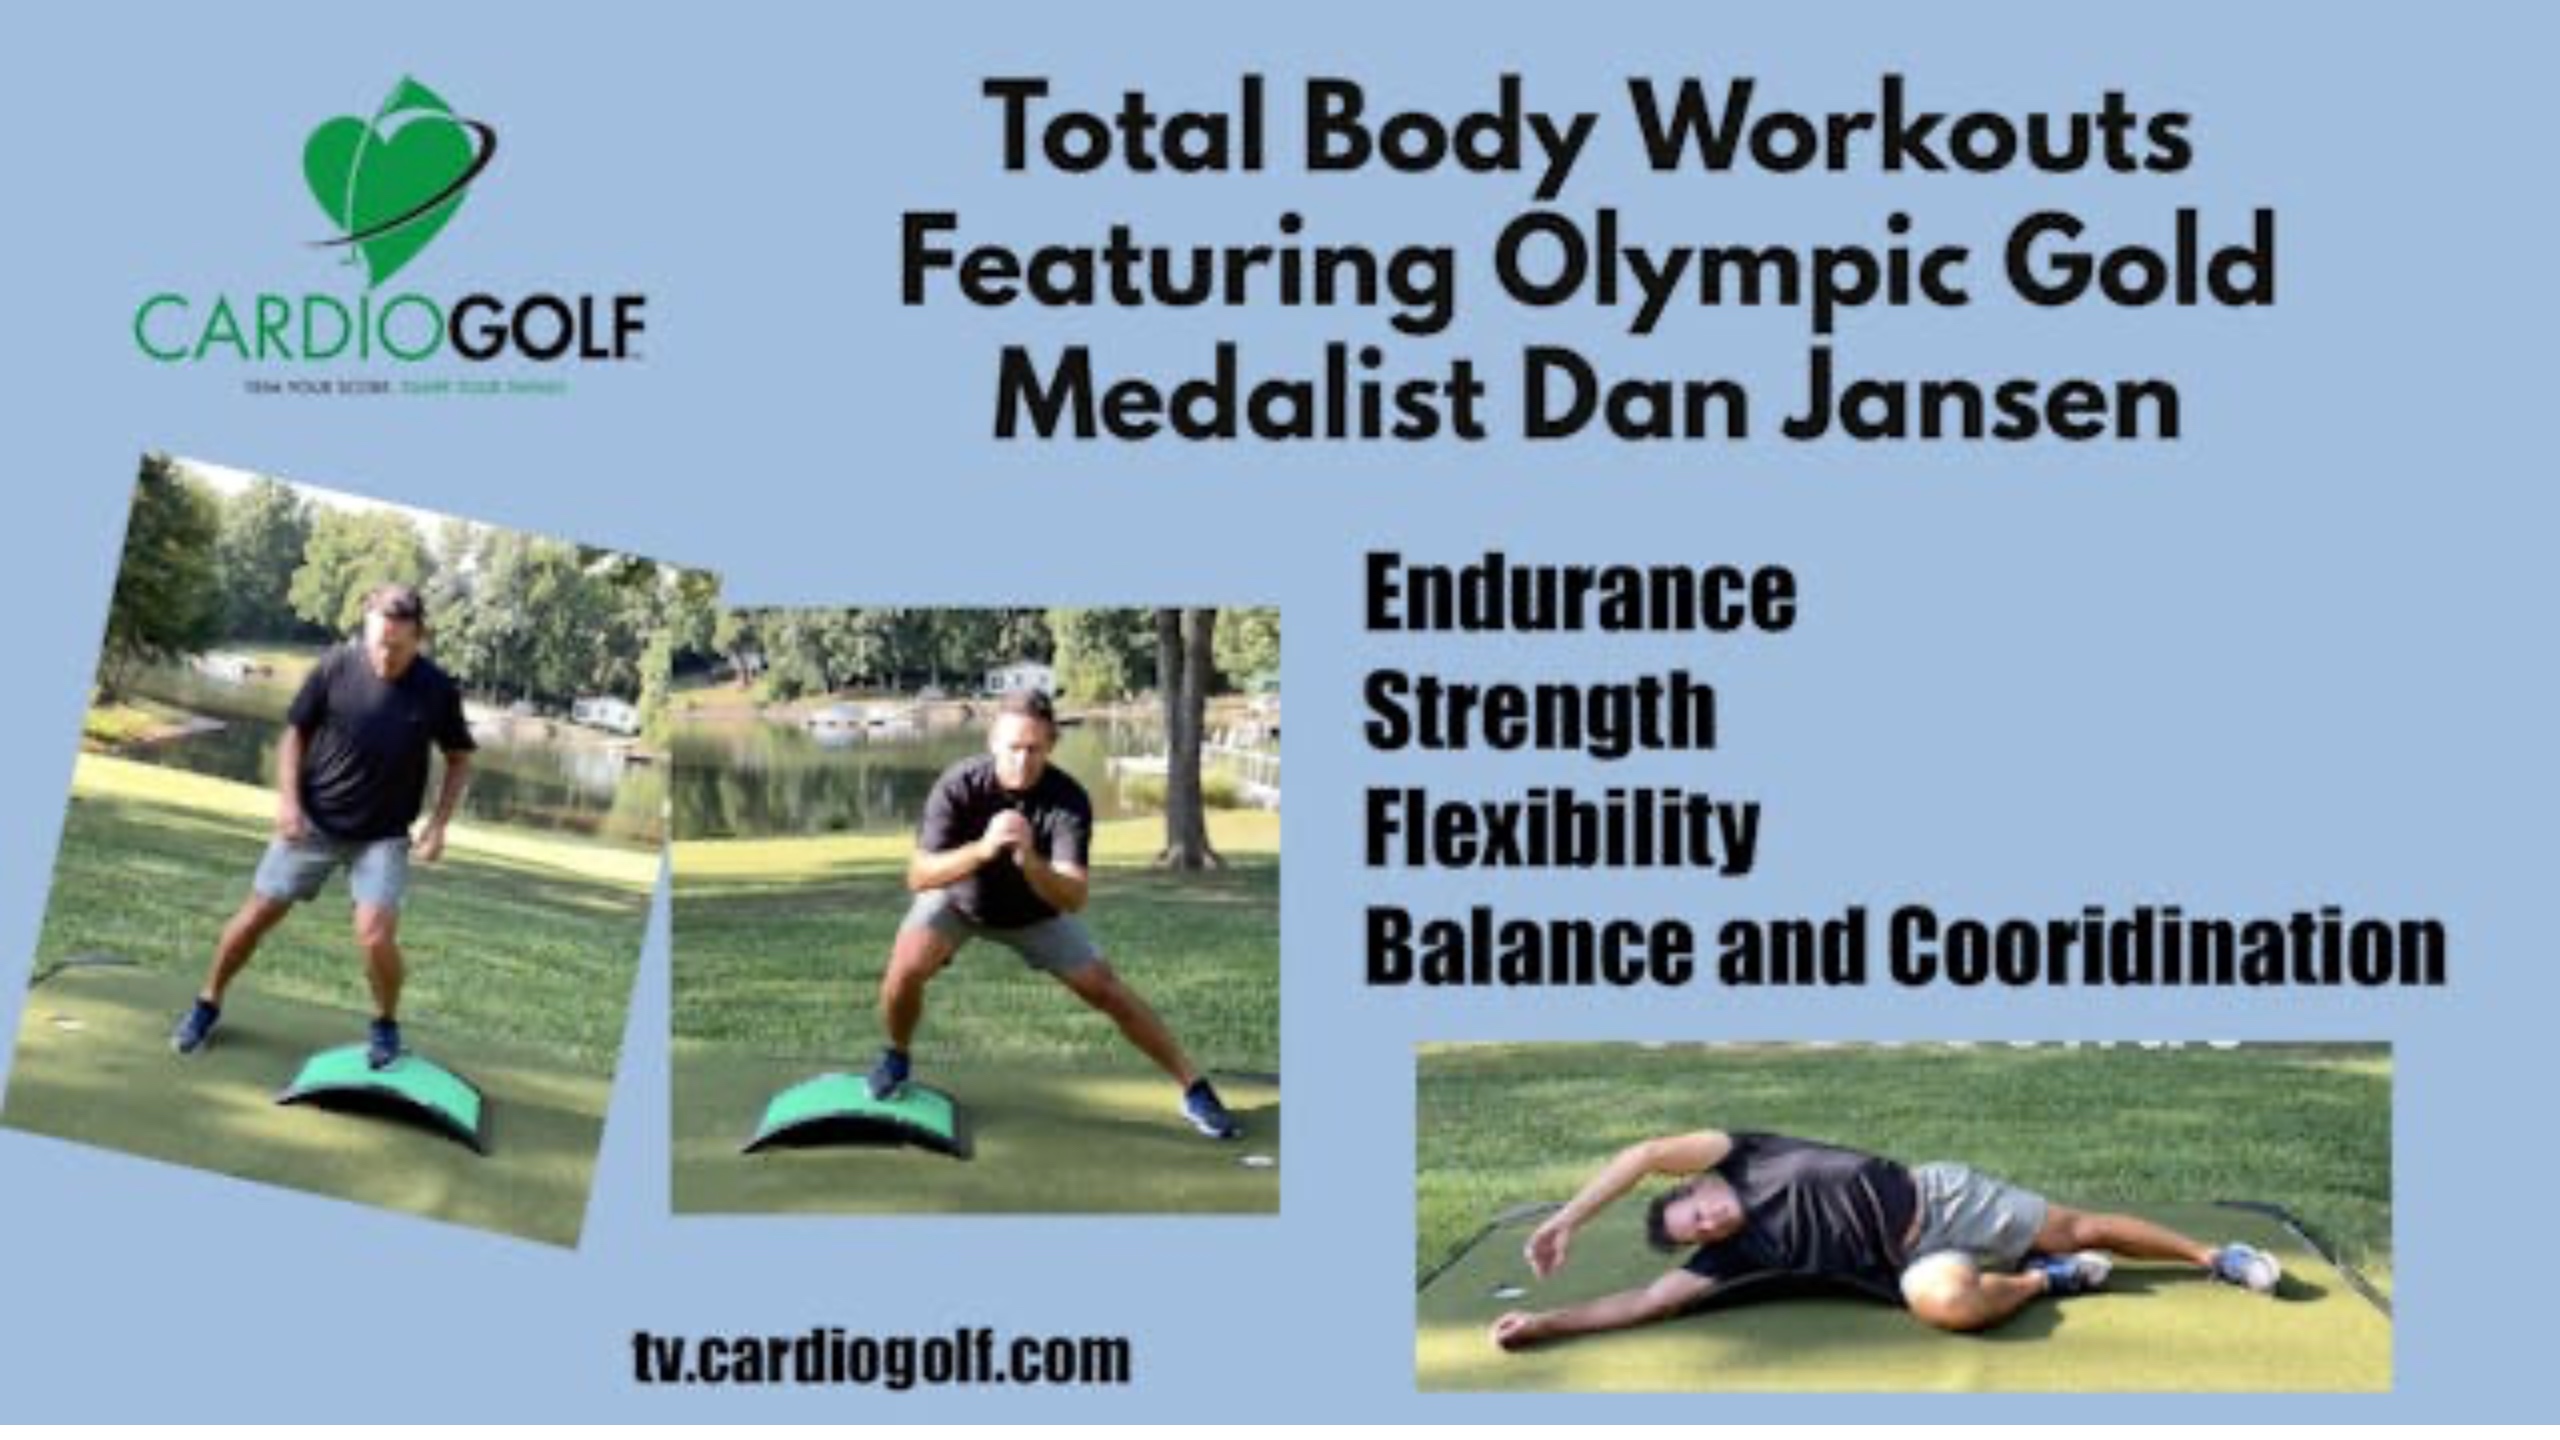 Workouts by Olympic Gold Medalist Dan Jansen. CardioGolf.com